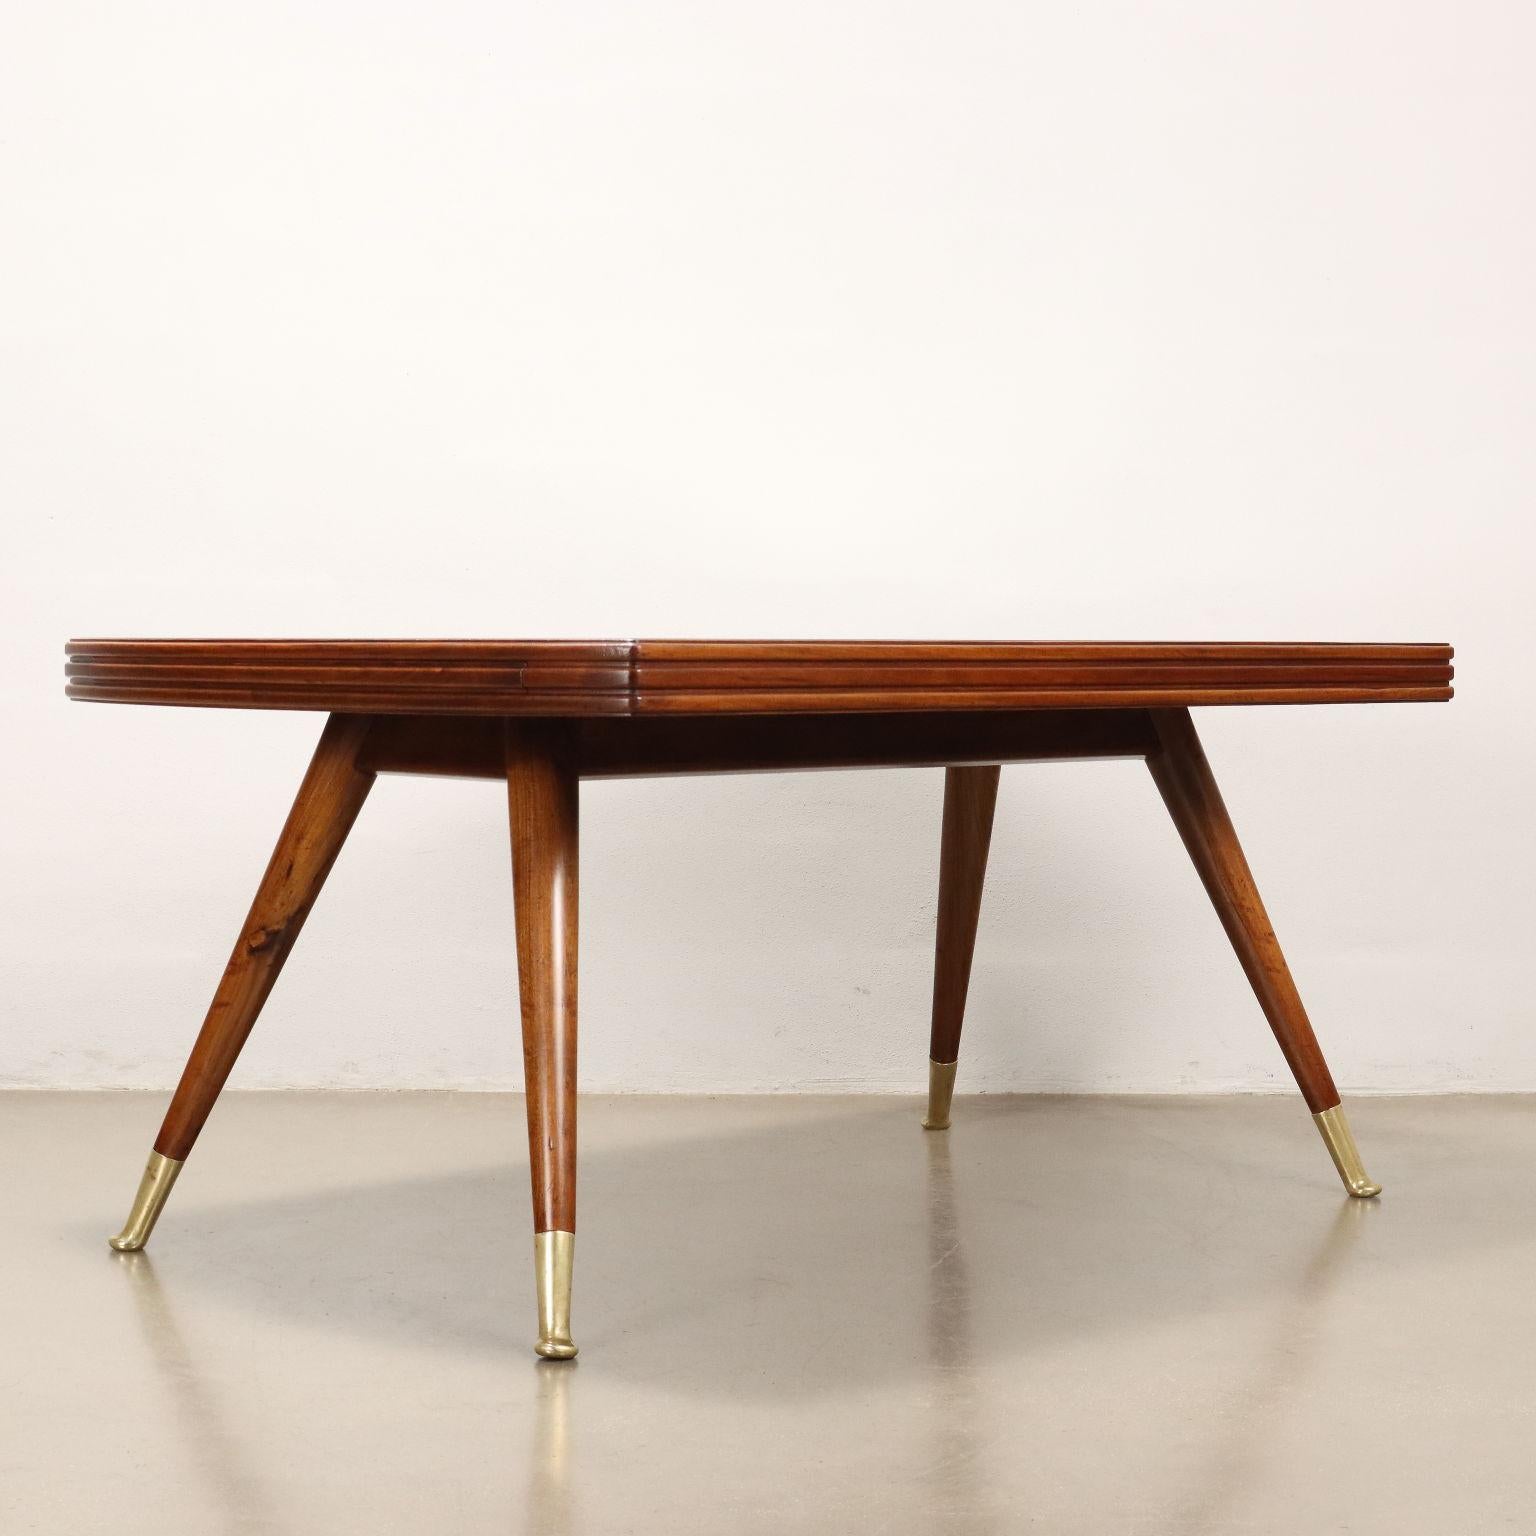 Argentine stained beechwood rectangular table 1950s For Sale 4